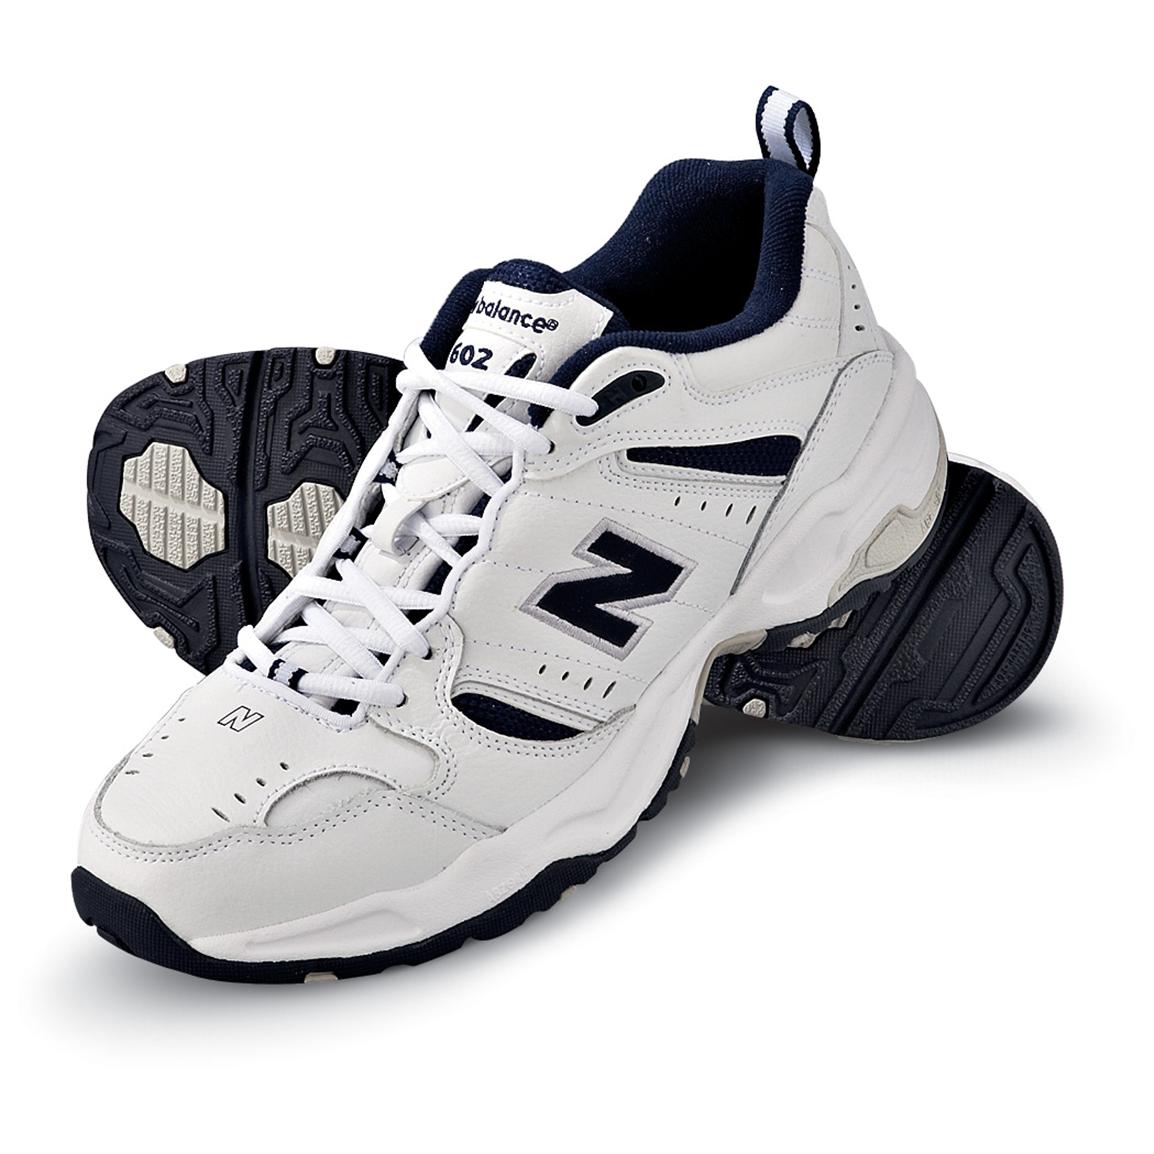 Aeródromo pobreza pellizco Men's New Balance® 602 Athletic Shoes, White / Navy - 125540, Running Shoes  & Sneakers at Sportsman's Guide